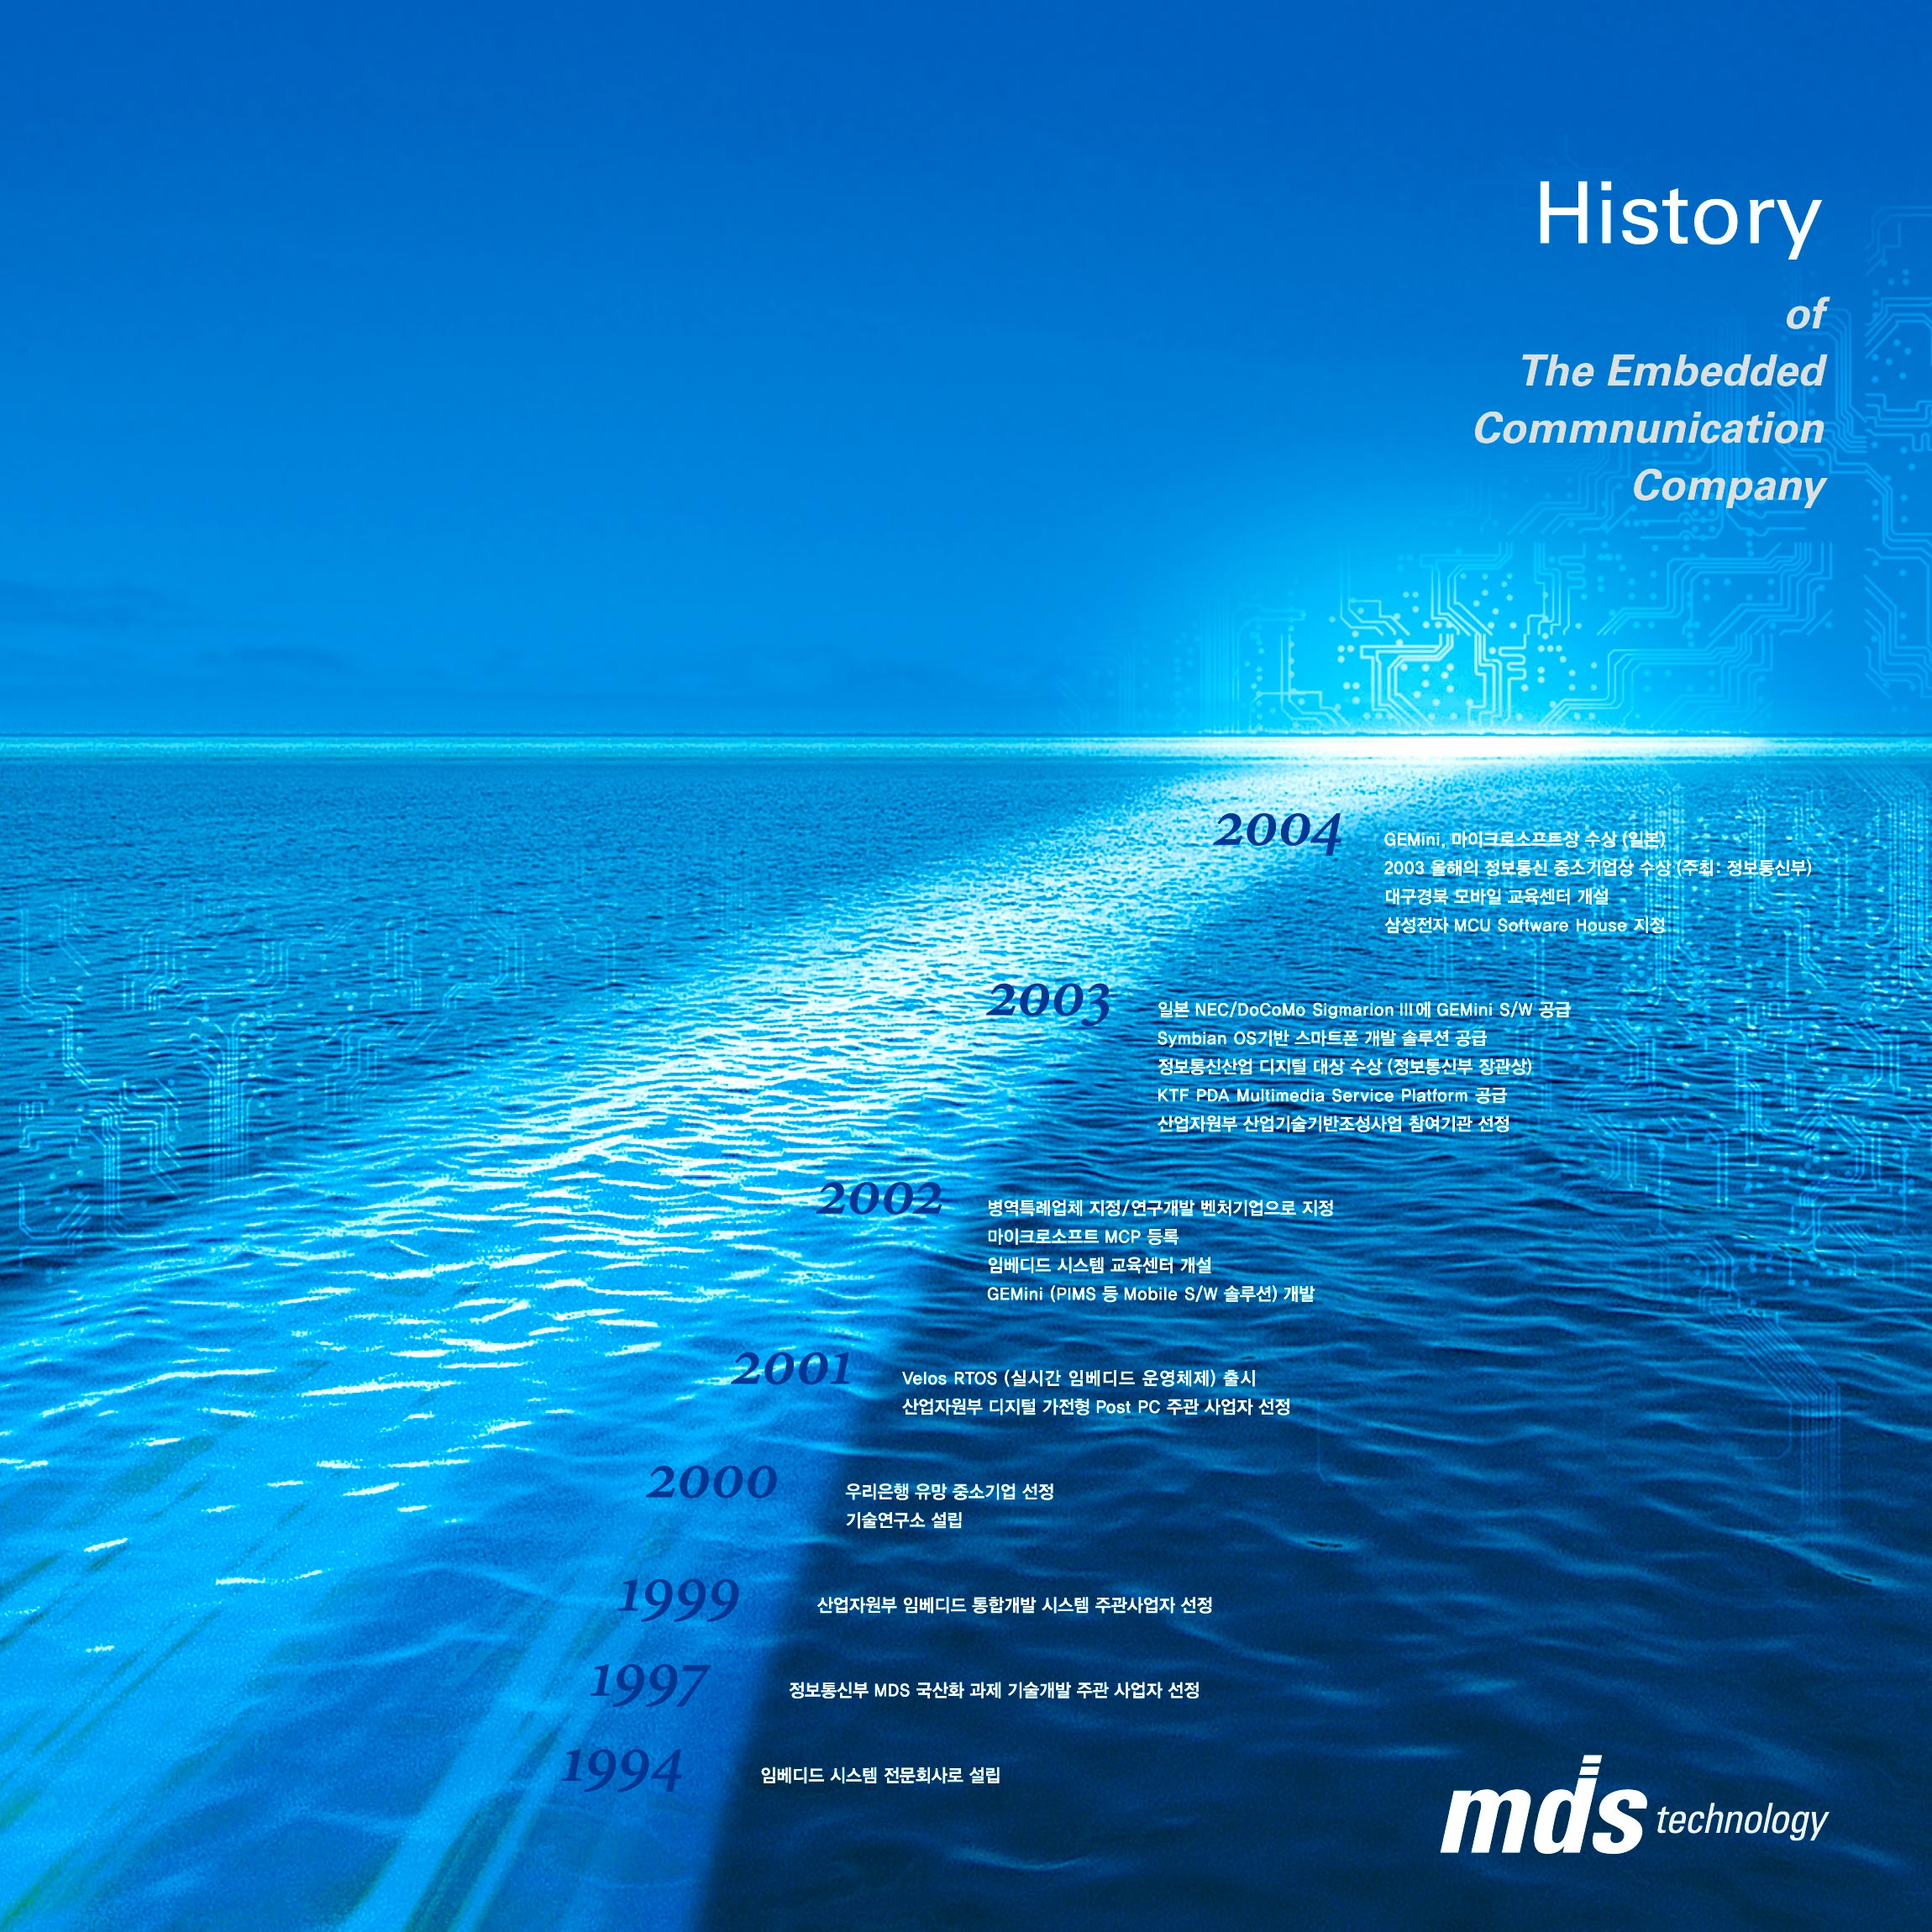 MDS Poster MDS Technology Posters & Banners poster-history-company3.jpg